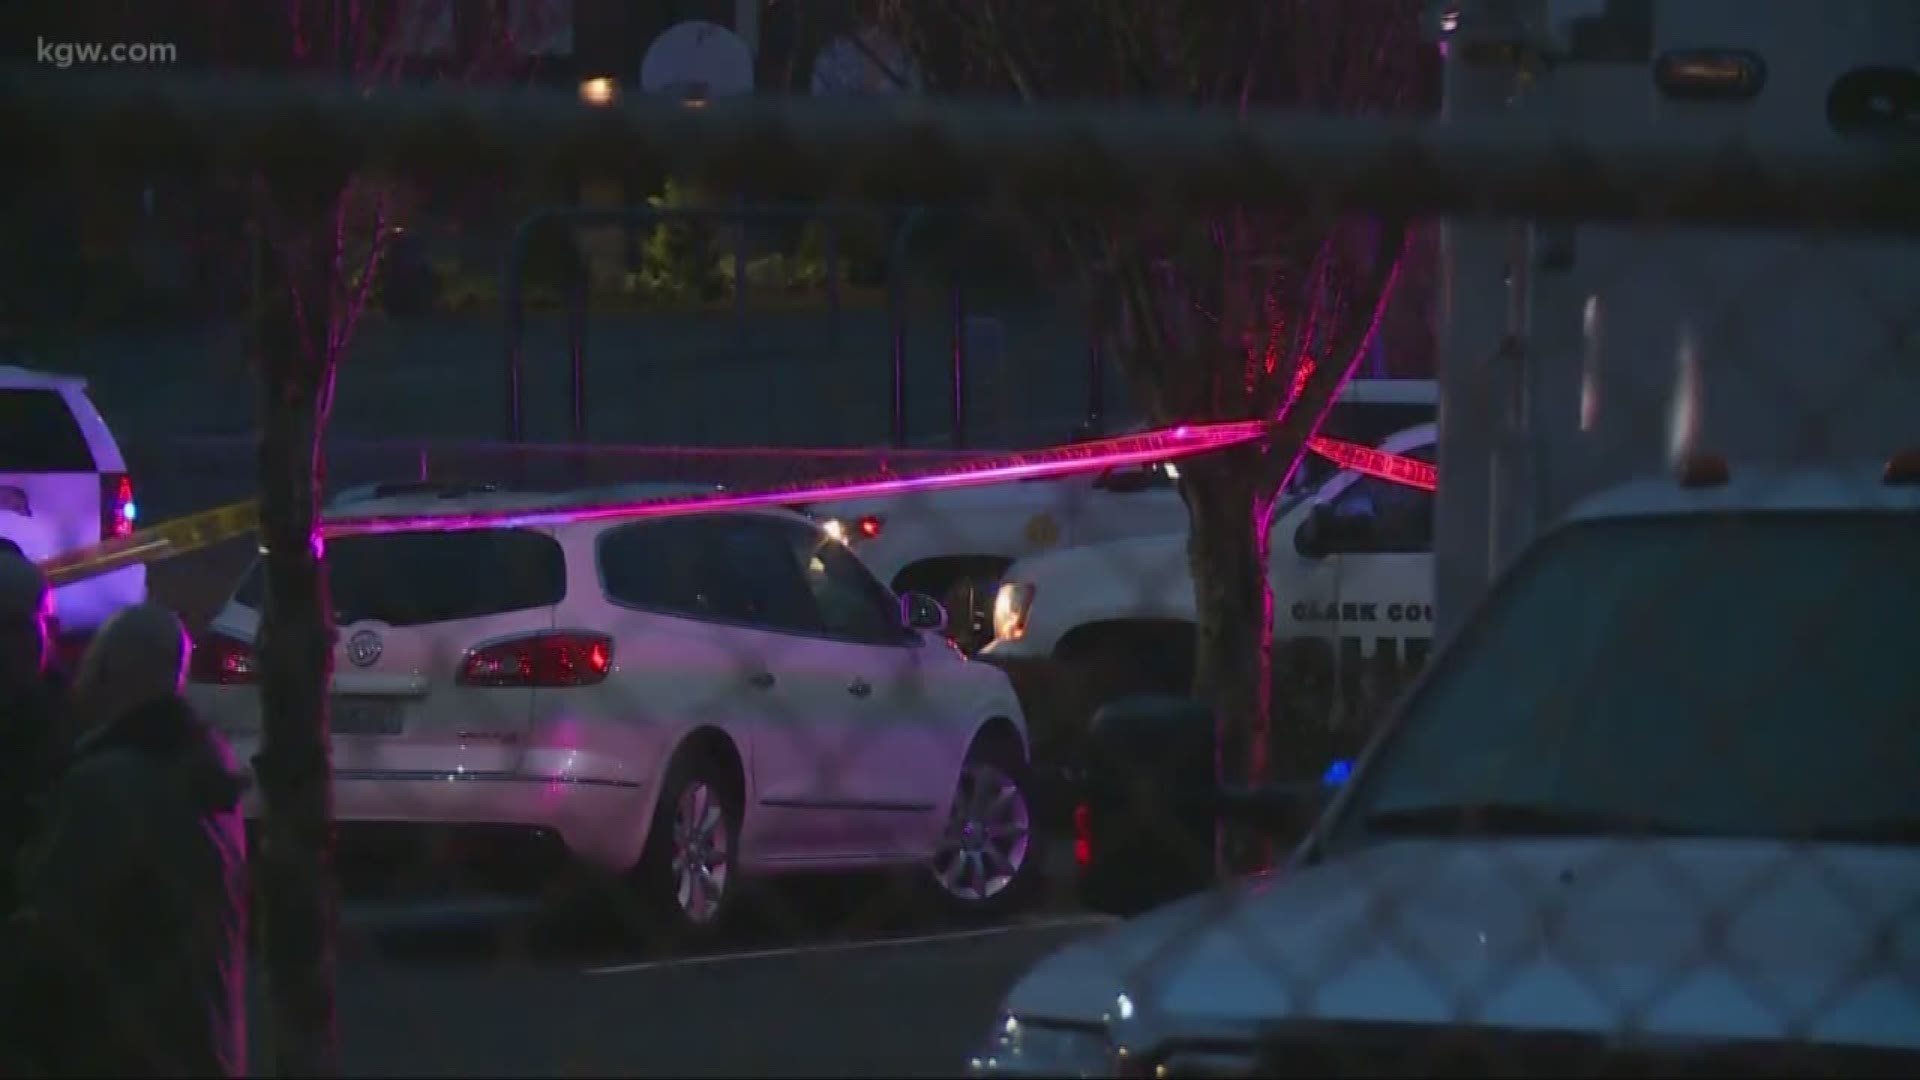 Two people were shot and wounded in a parking lot outside a Vancouver school. The suspect shot himself during a police chase.